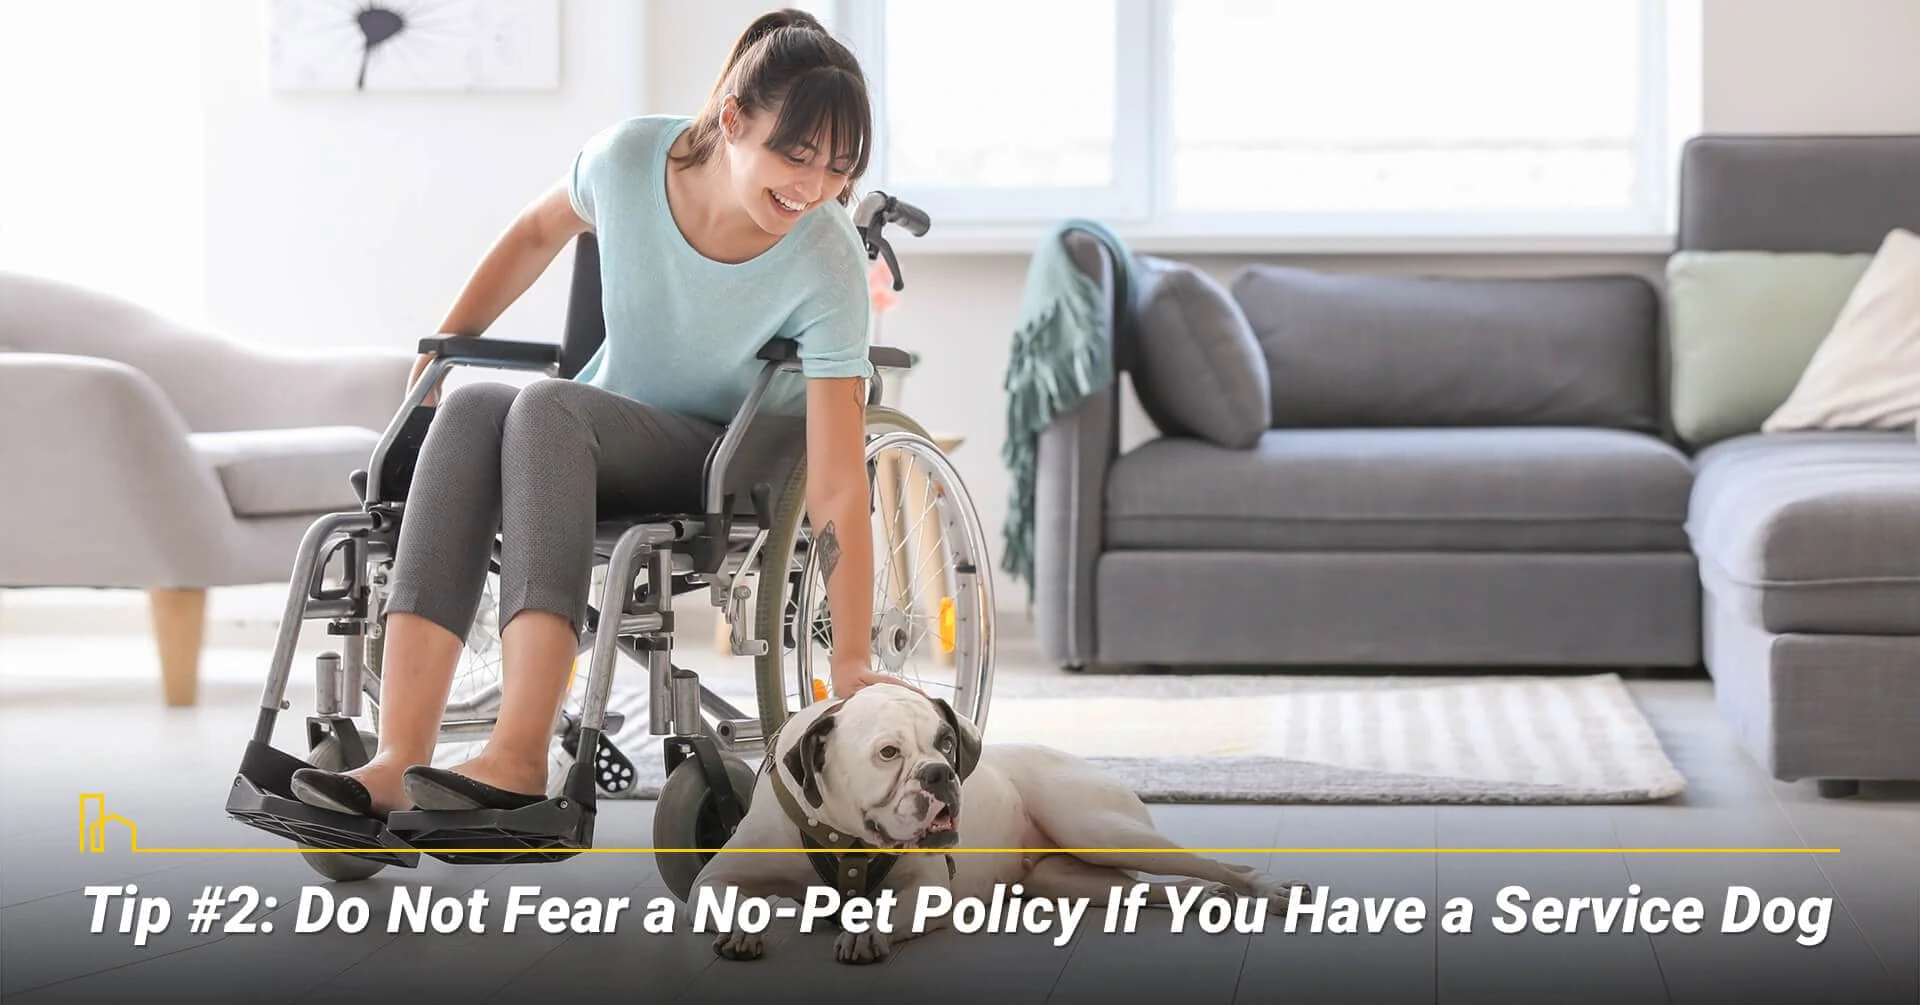 Tip #2: Do Not Fear a No-Pet Policy If You Have a Service Dog, can have service animals